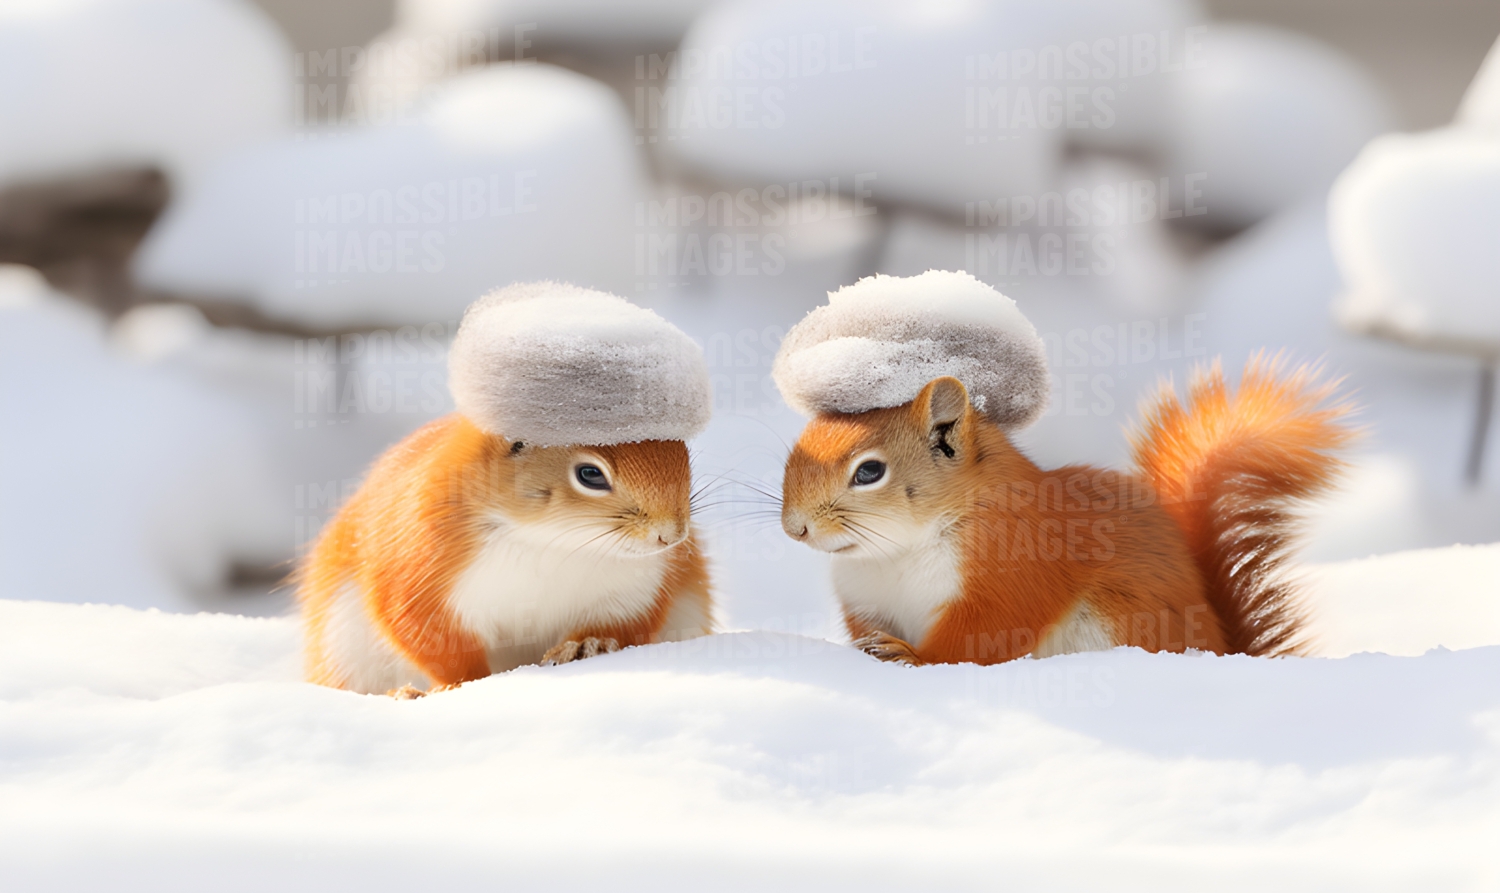 Red squirrels wearing hats in the snow